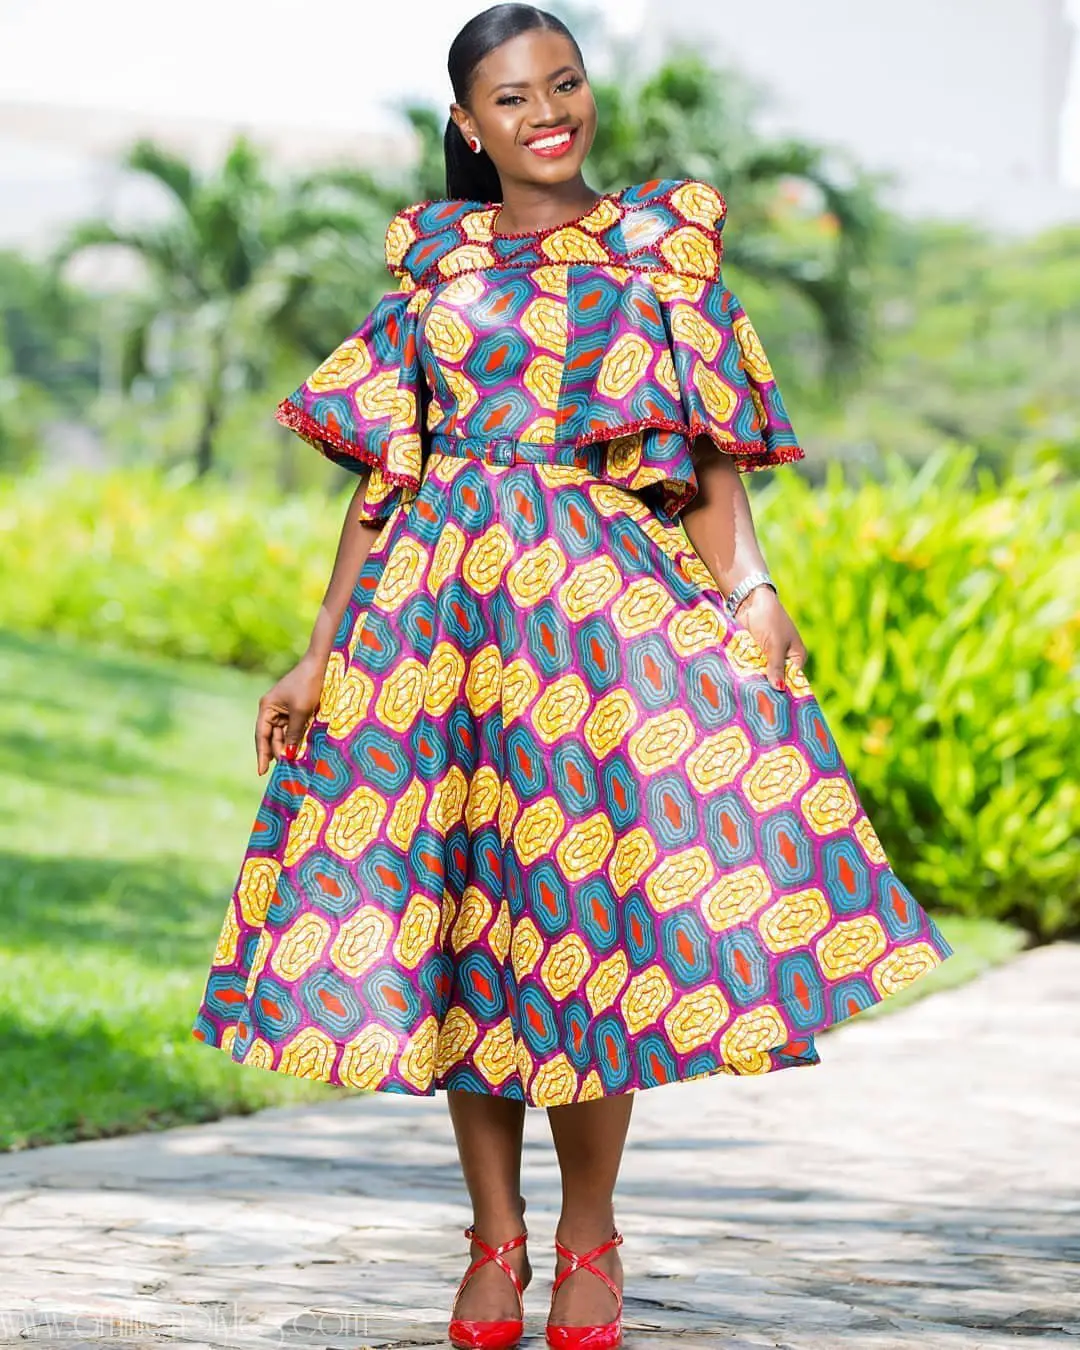 Just Because Only The Best Ankara Styles Of 2019 Is Fit For Amillionstyles Queens